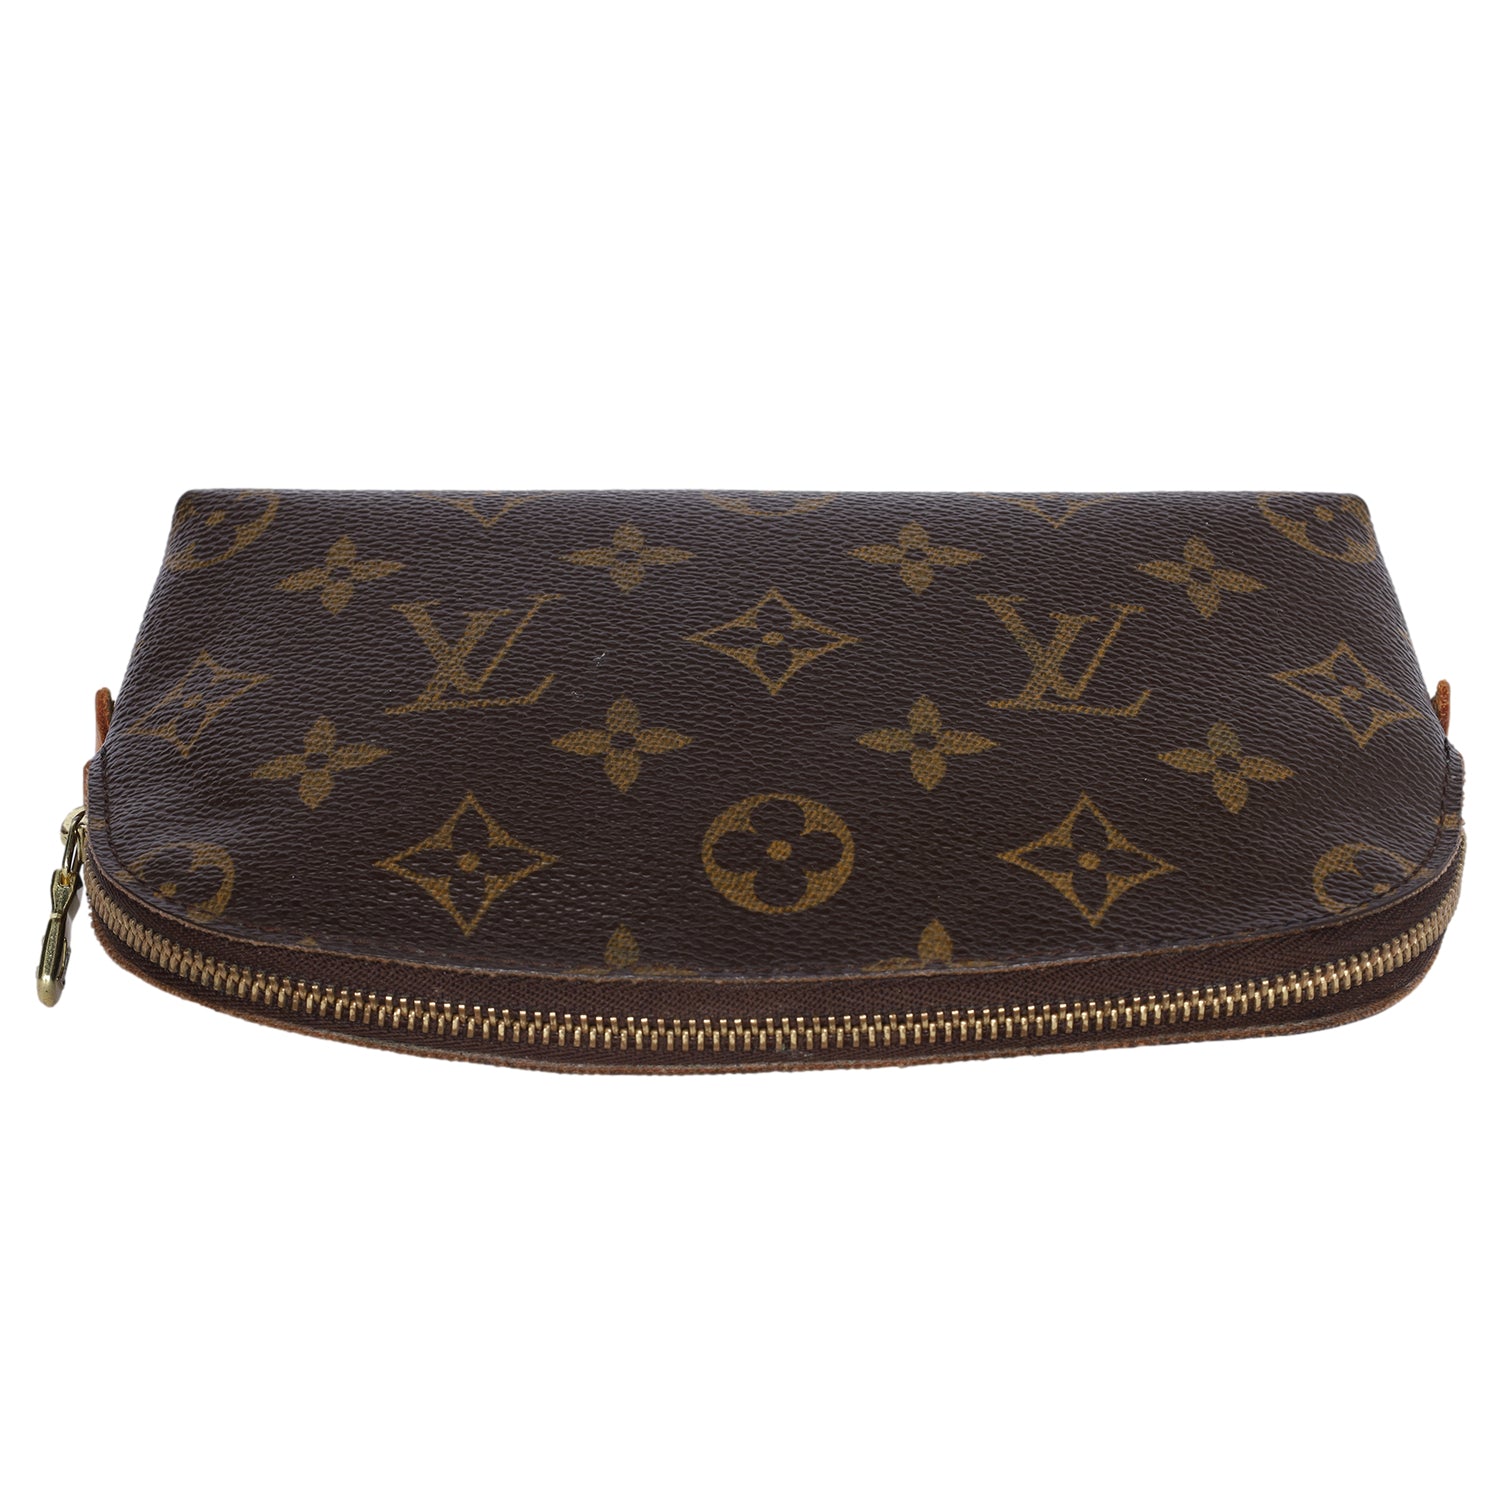 Monogram Cosmetic Pouch (Authentic Pre-Owned) – The Lady Bag